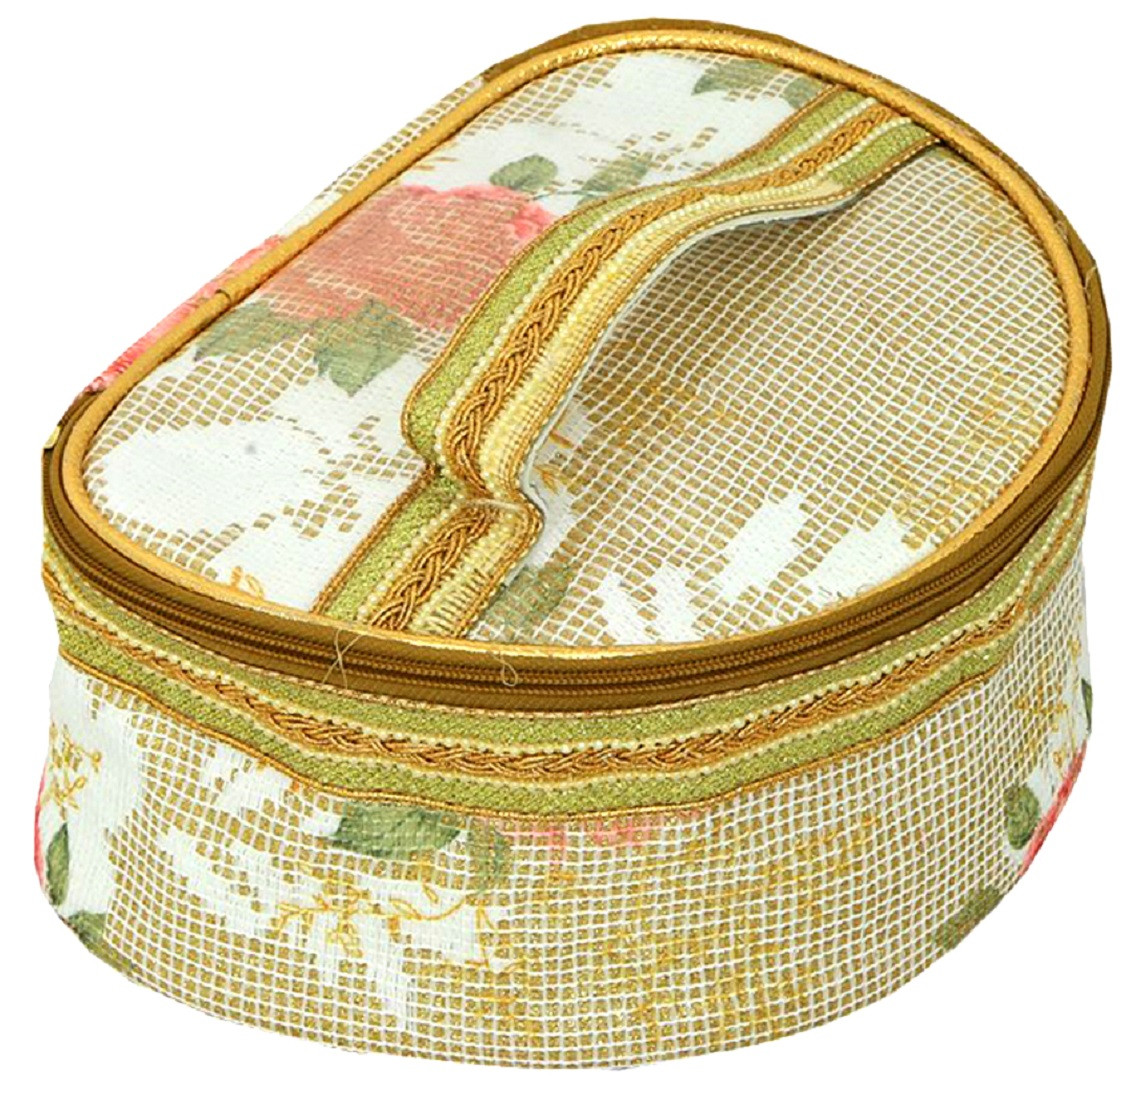 Kuber Industries Laminated Multifunction Travel Cosmetic Make-Up Bag For Cosmetics, Makeup, Brushes (Gold)